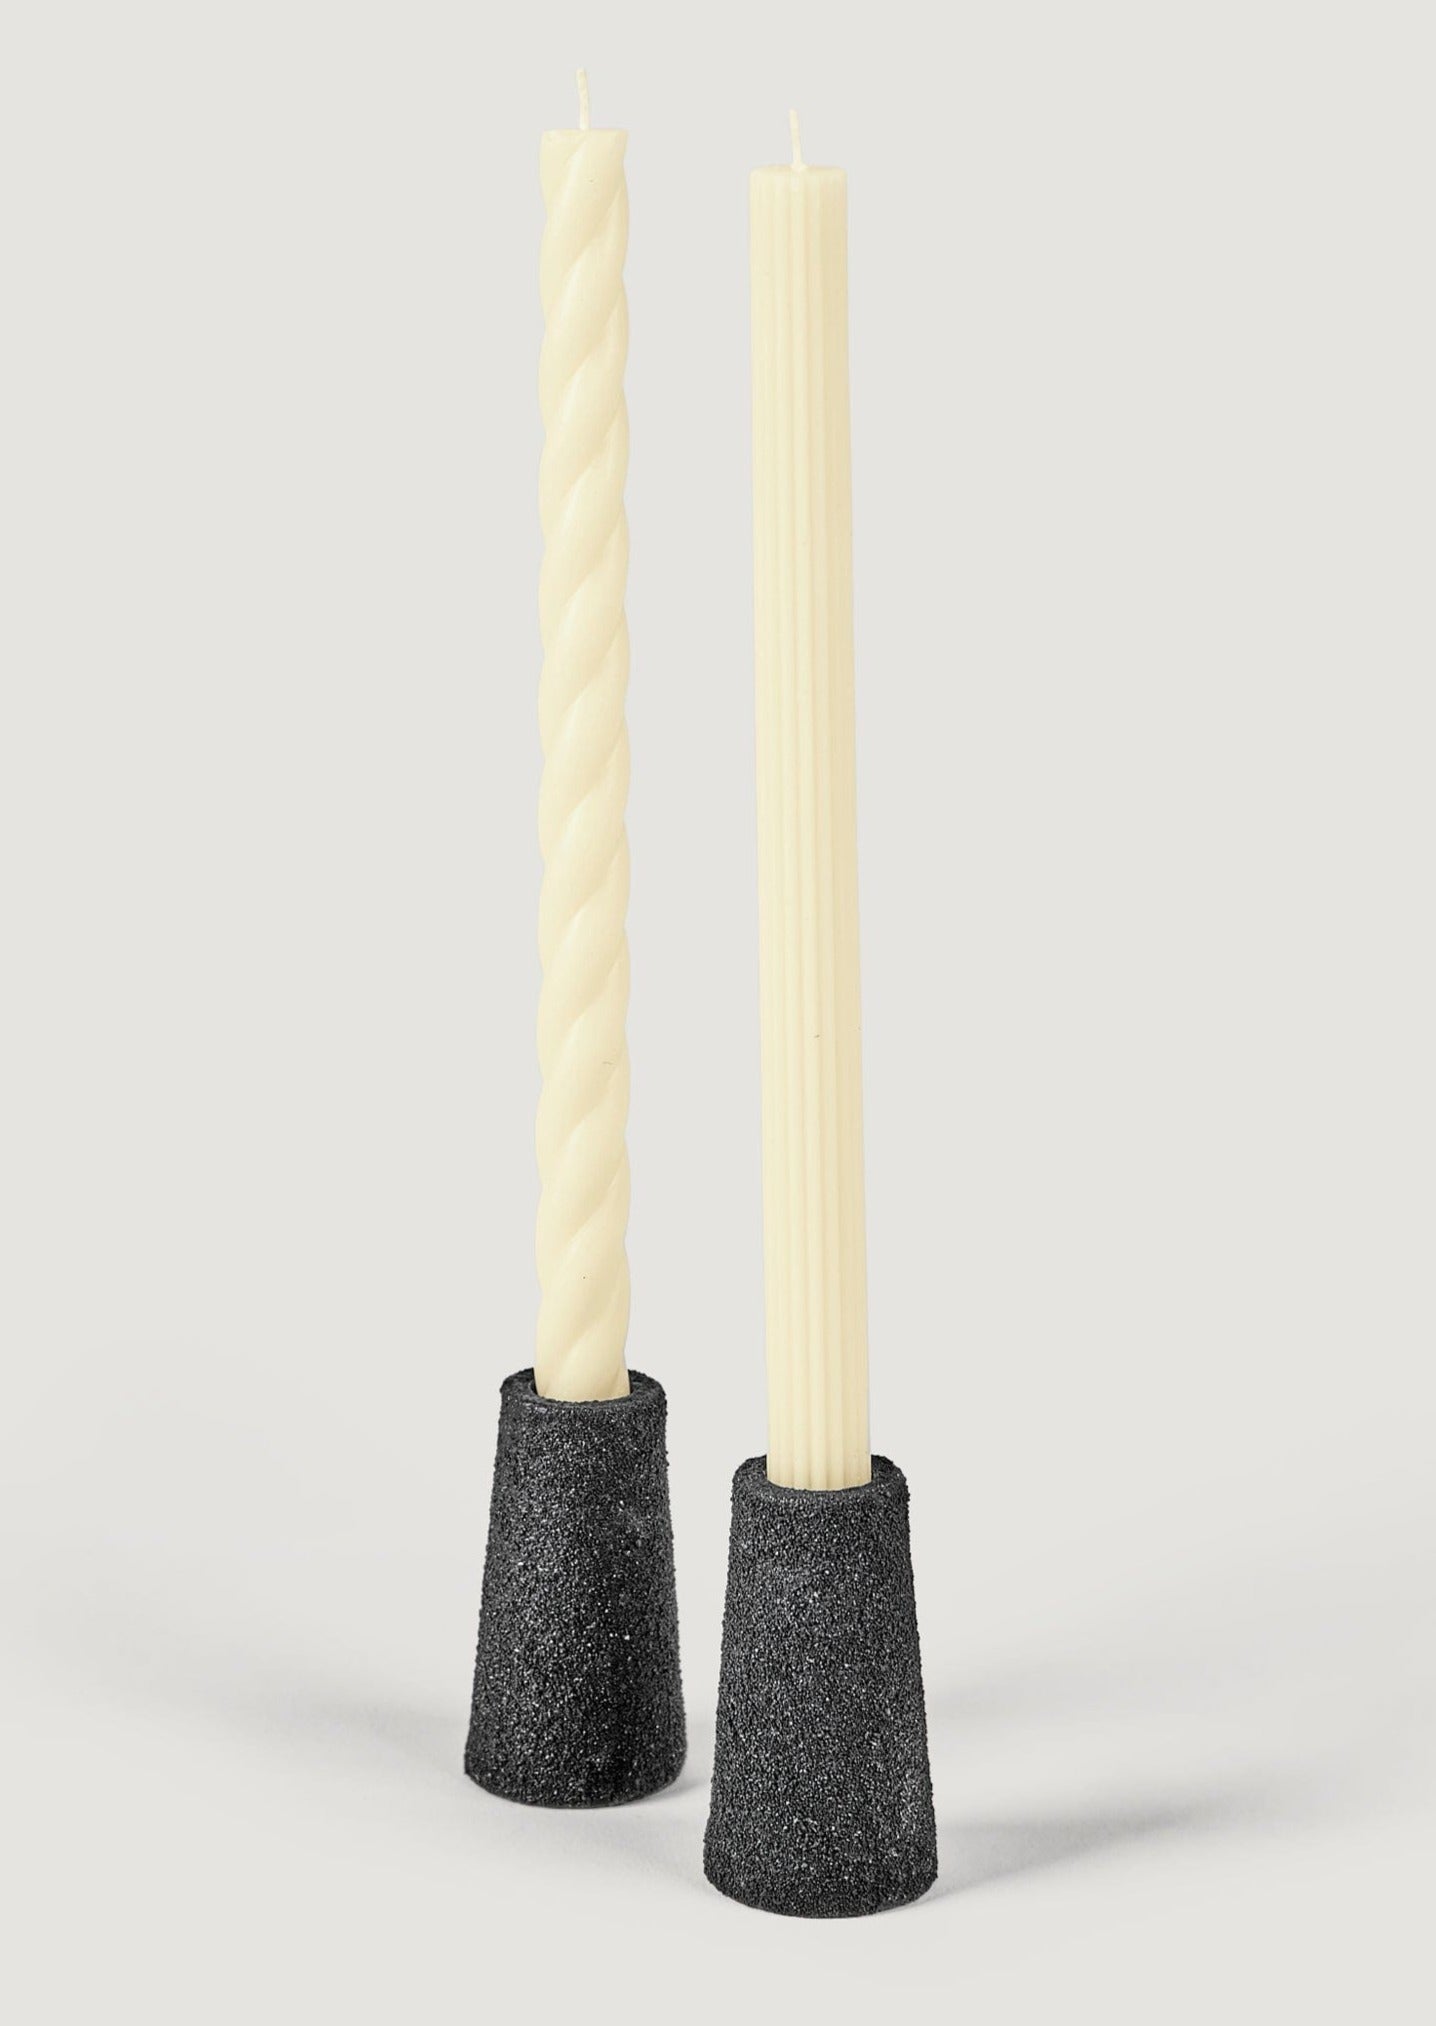 Set of 2 Metal Taper Candle Holders with Pumice Texture - 3.25